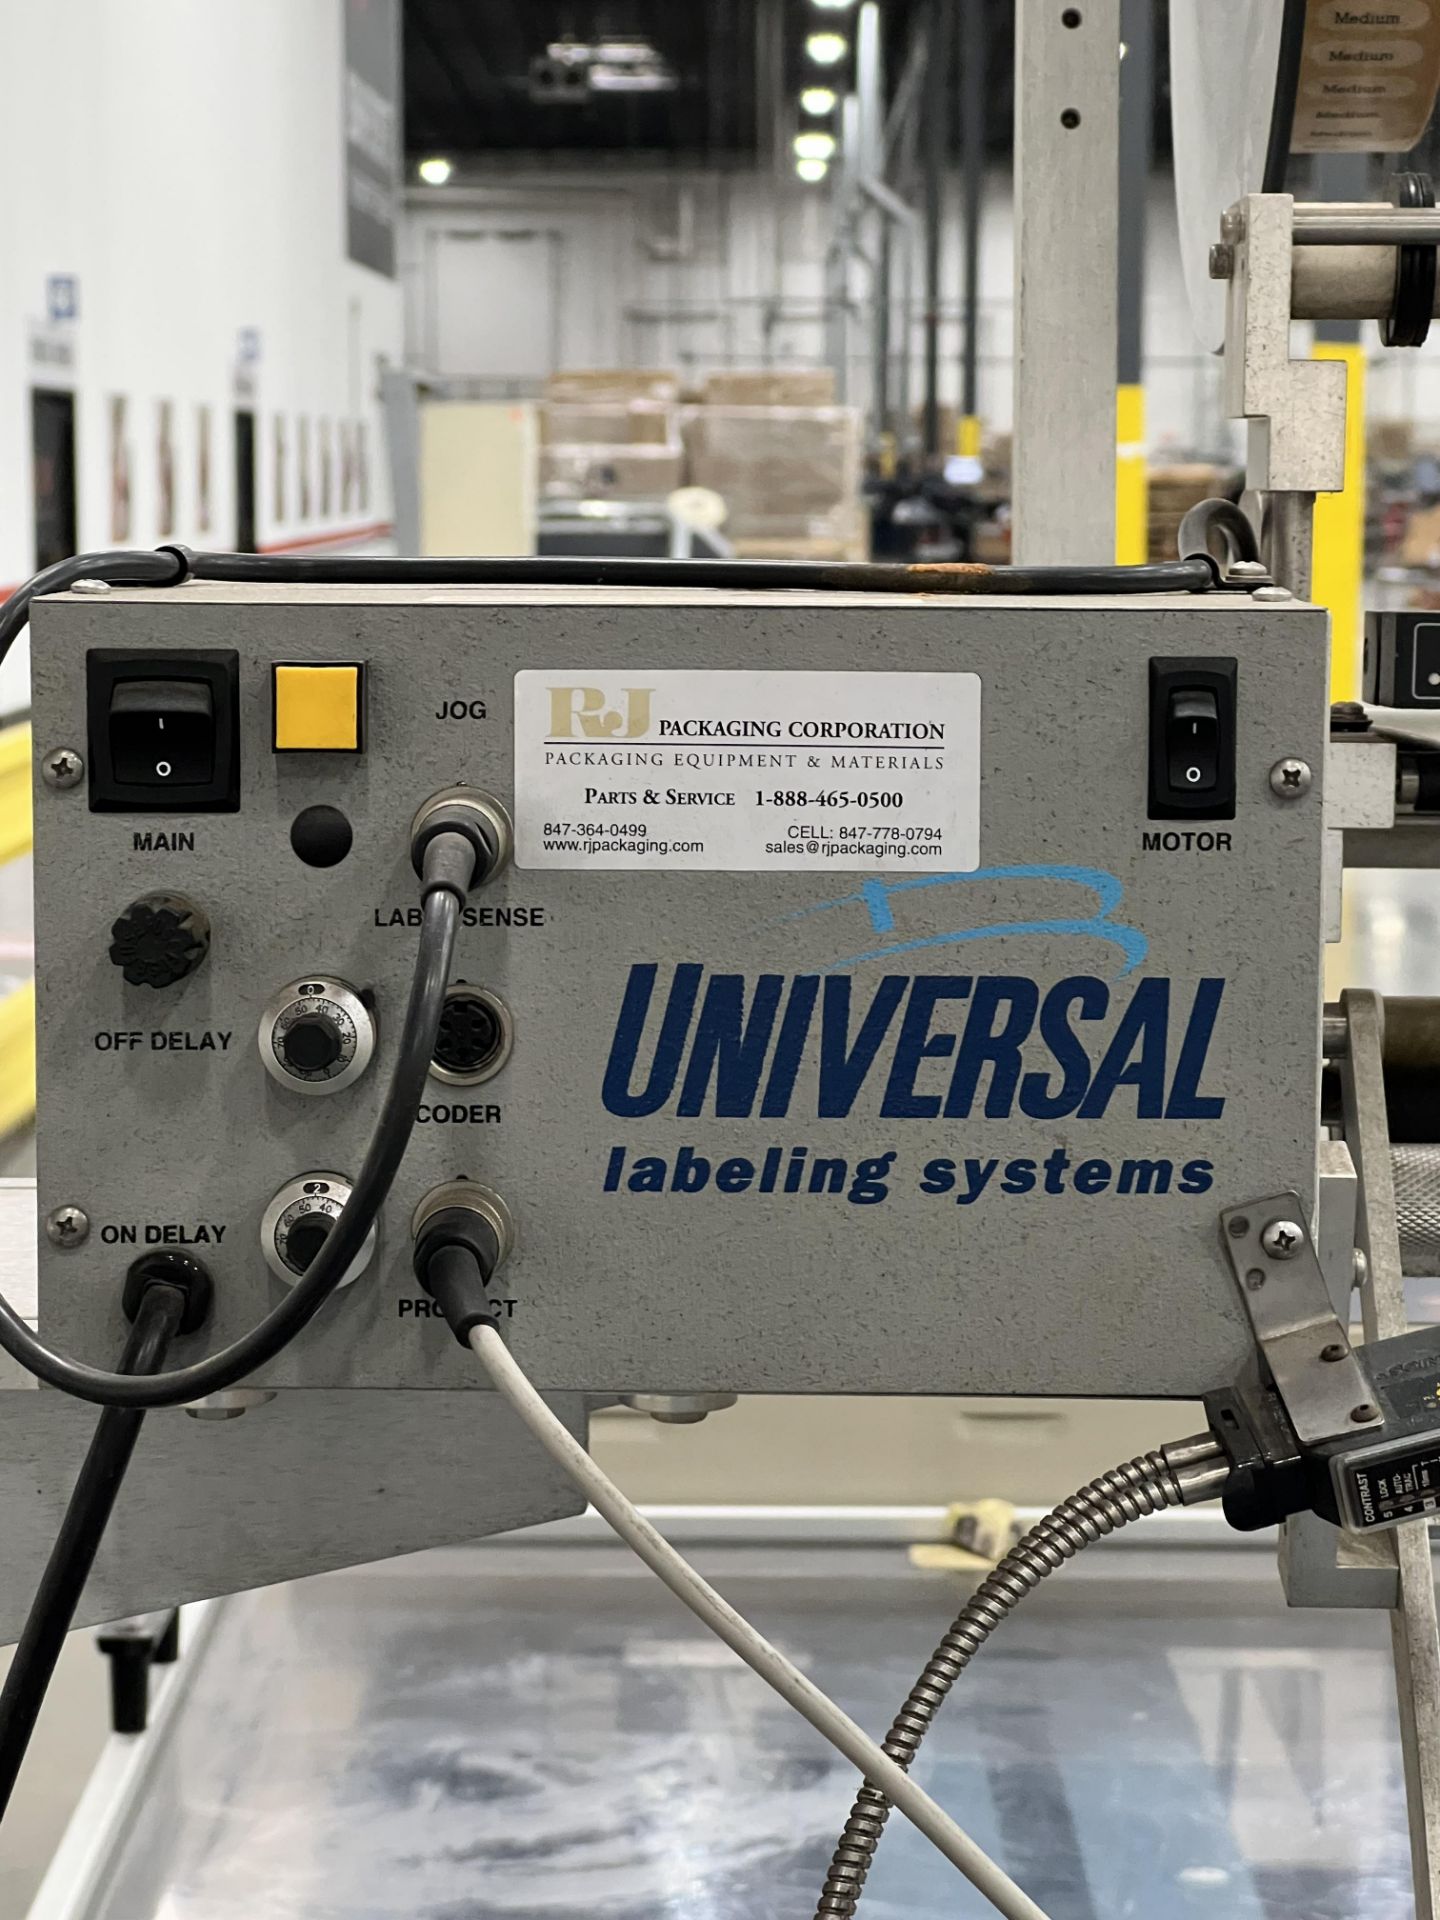 Universal Labeling Systems L-15 Label Applicator